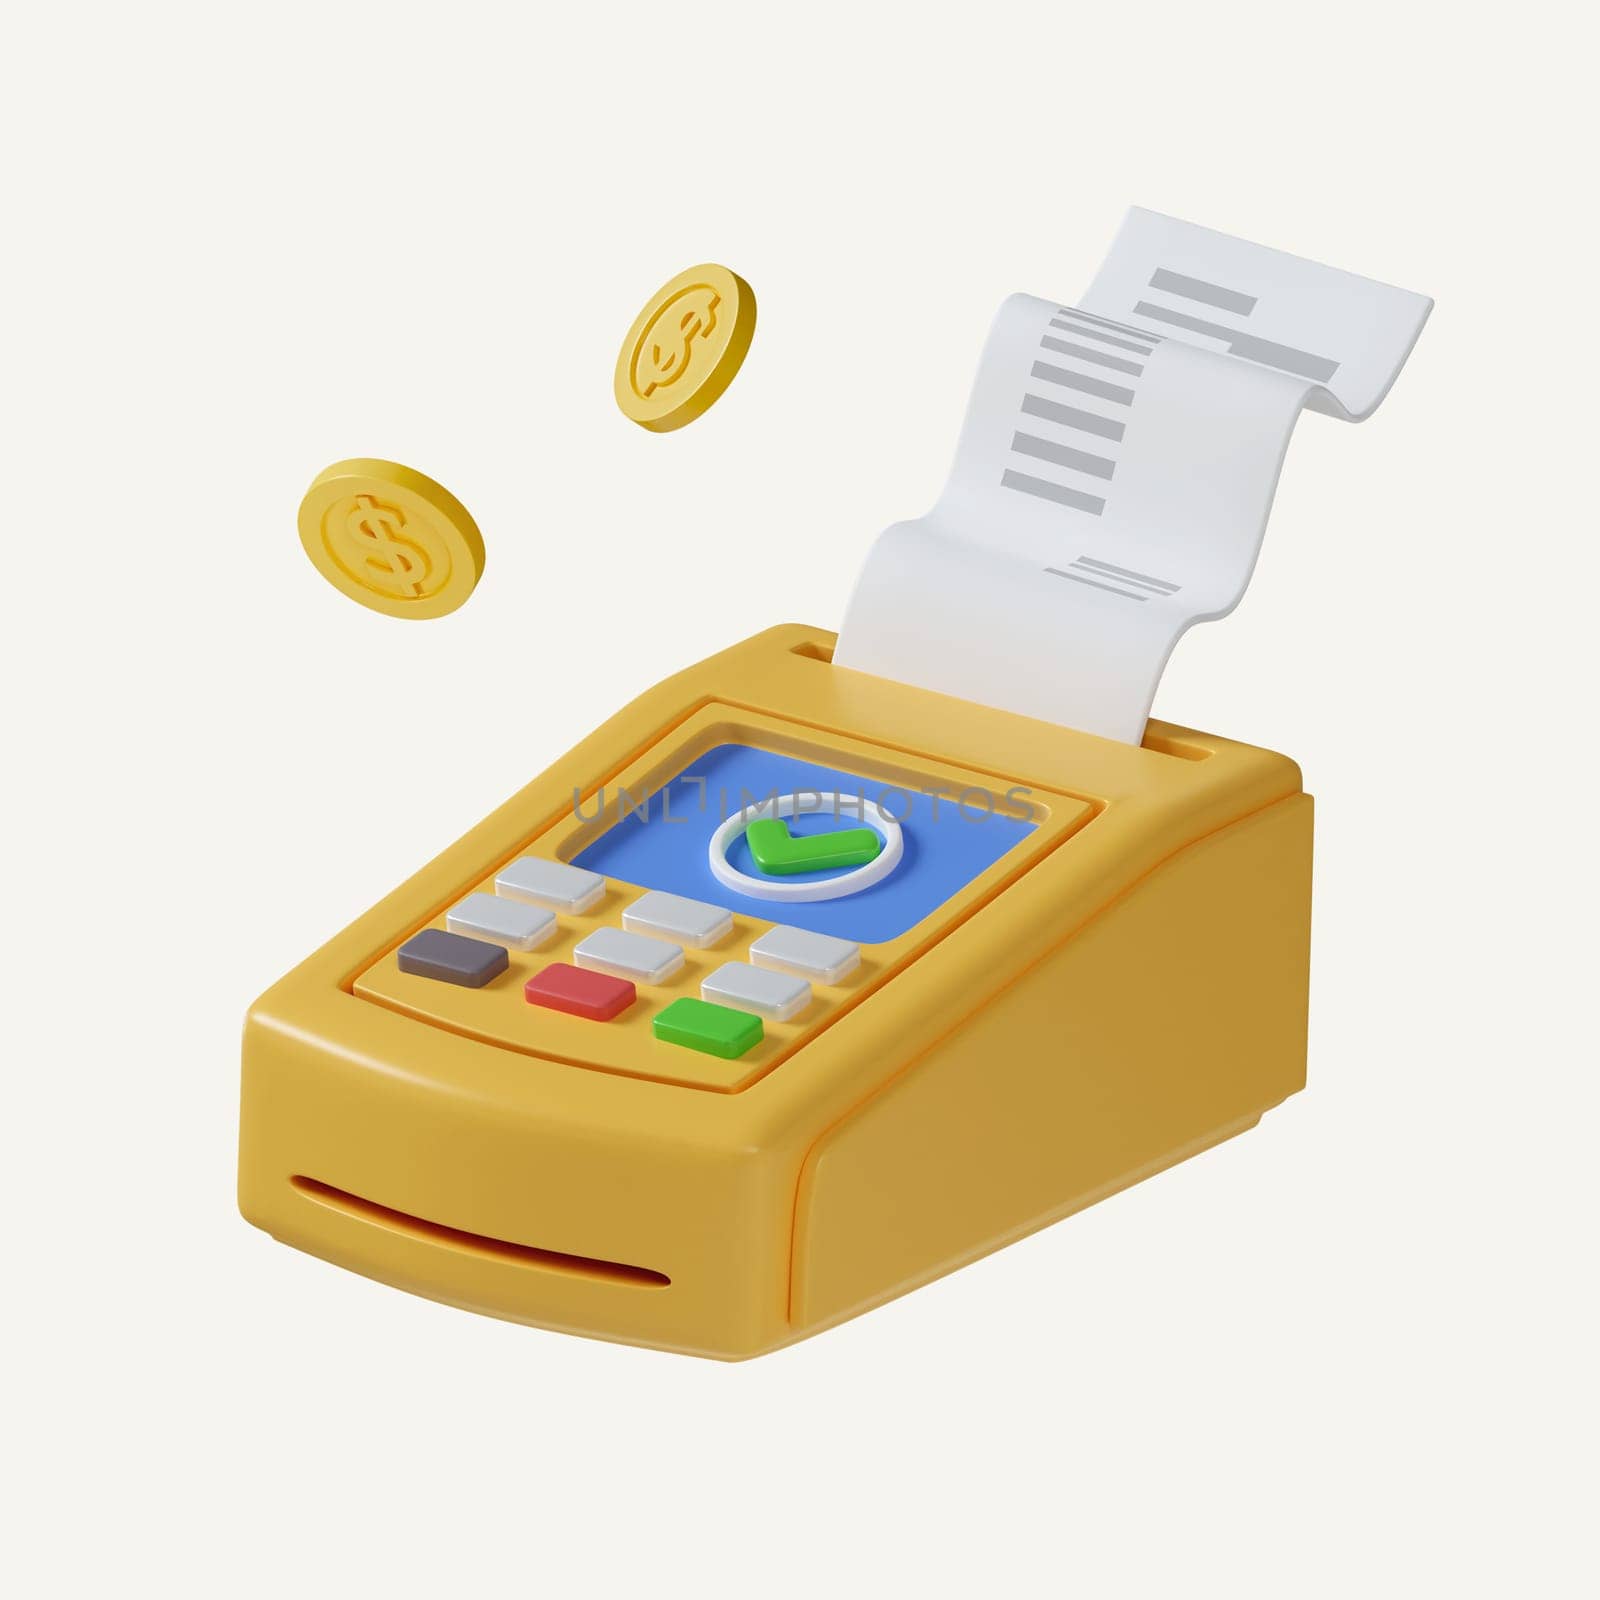 yellow payment machine or pos terminal, electronic bill payment and credit card with invoice or paper check receipt, coin isolated on white background. 3d illustration or 3d render.